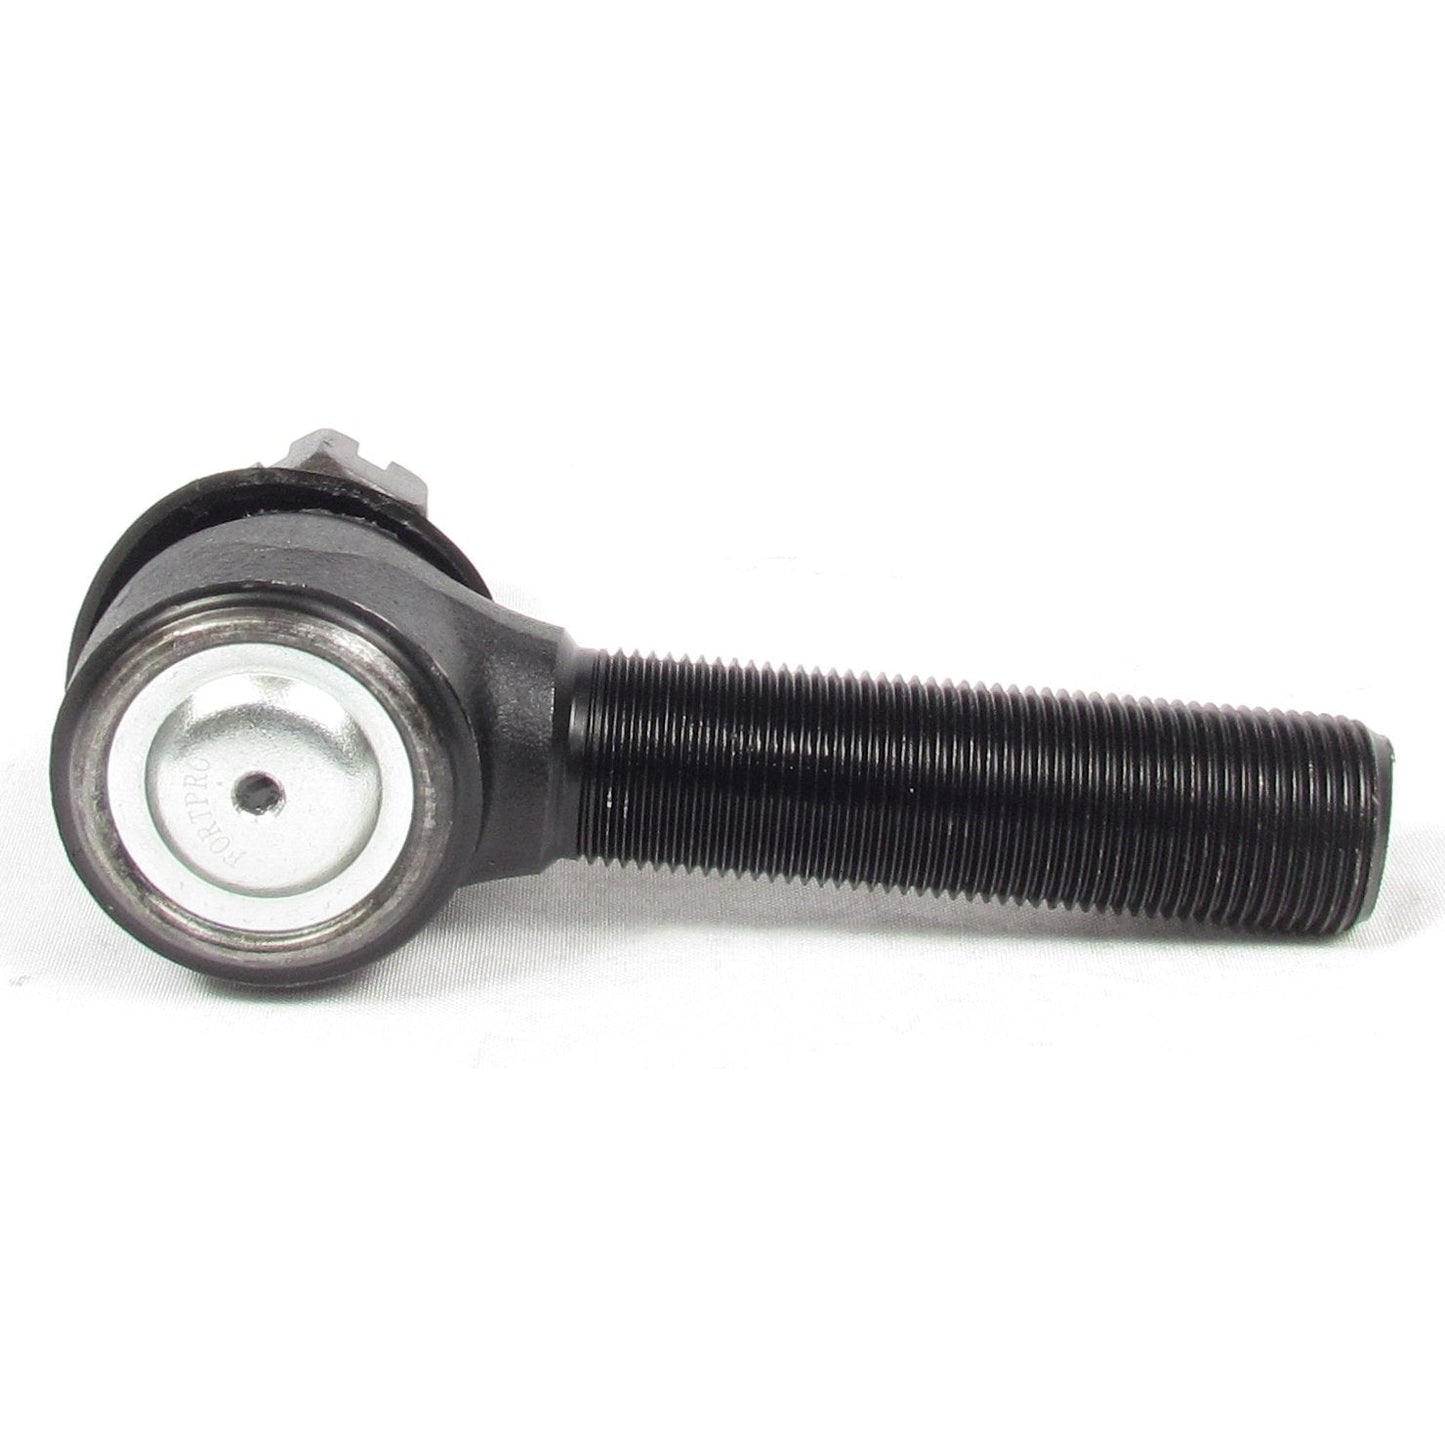 Fortpro Tie Rod End Compatible with Mack, International Replaces R230069 - Right Side | F265859